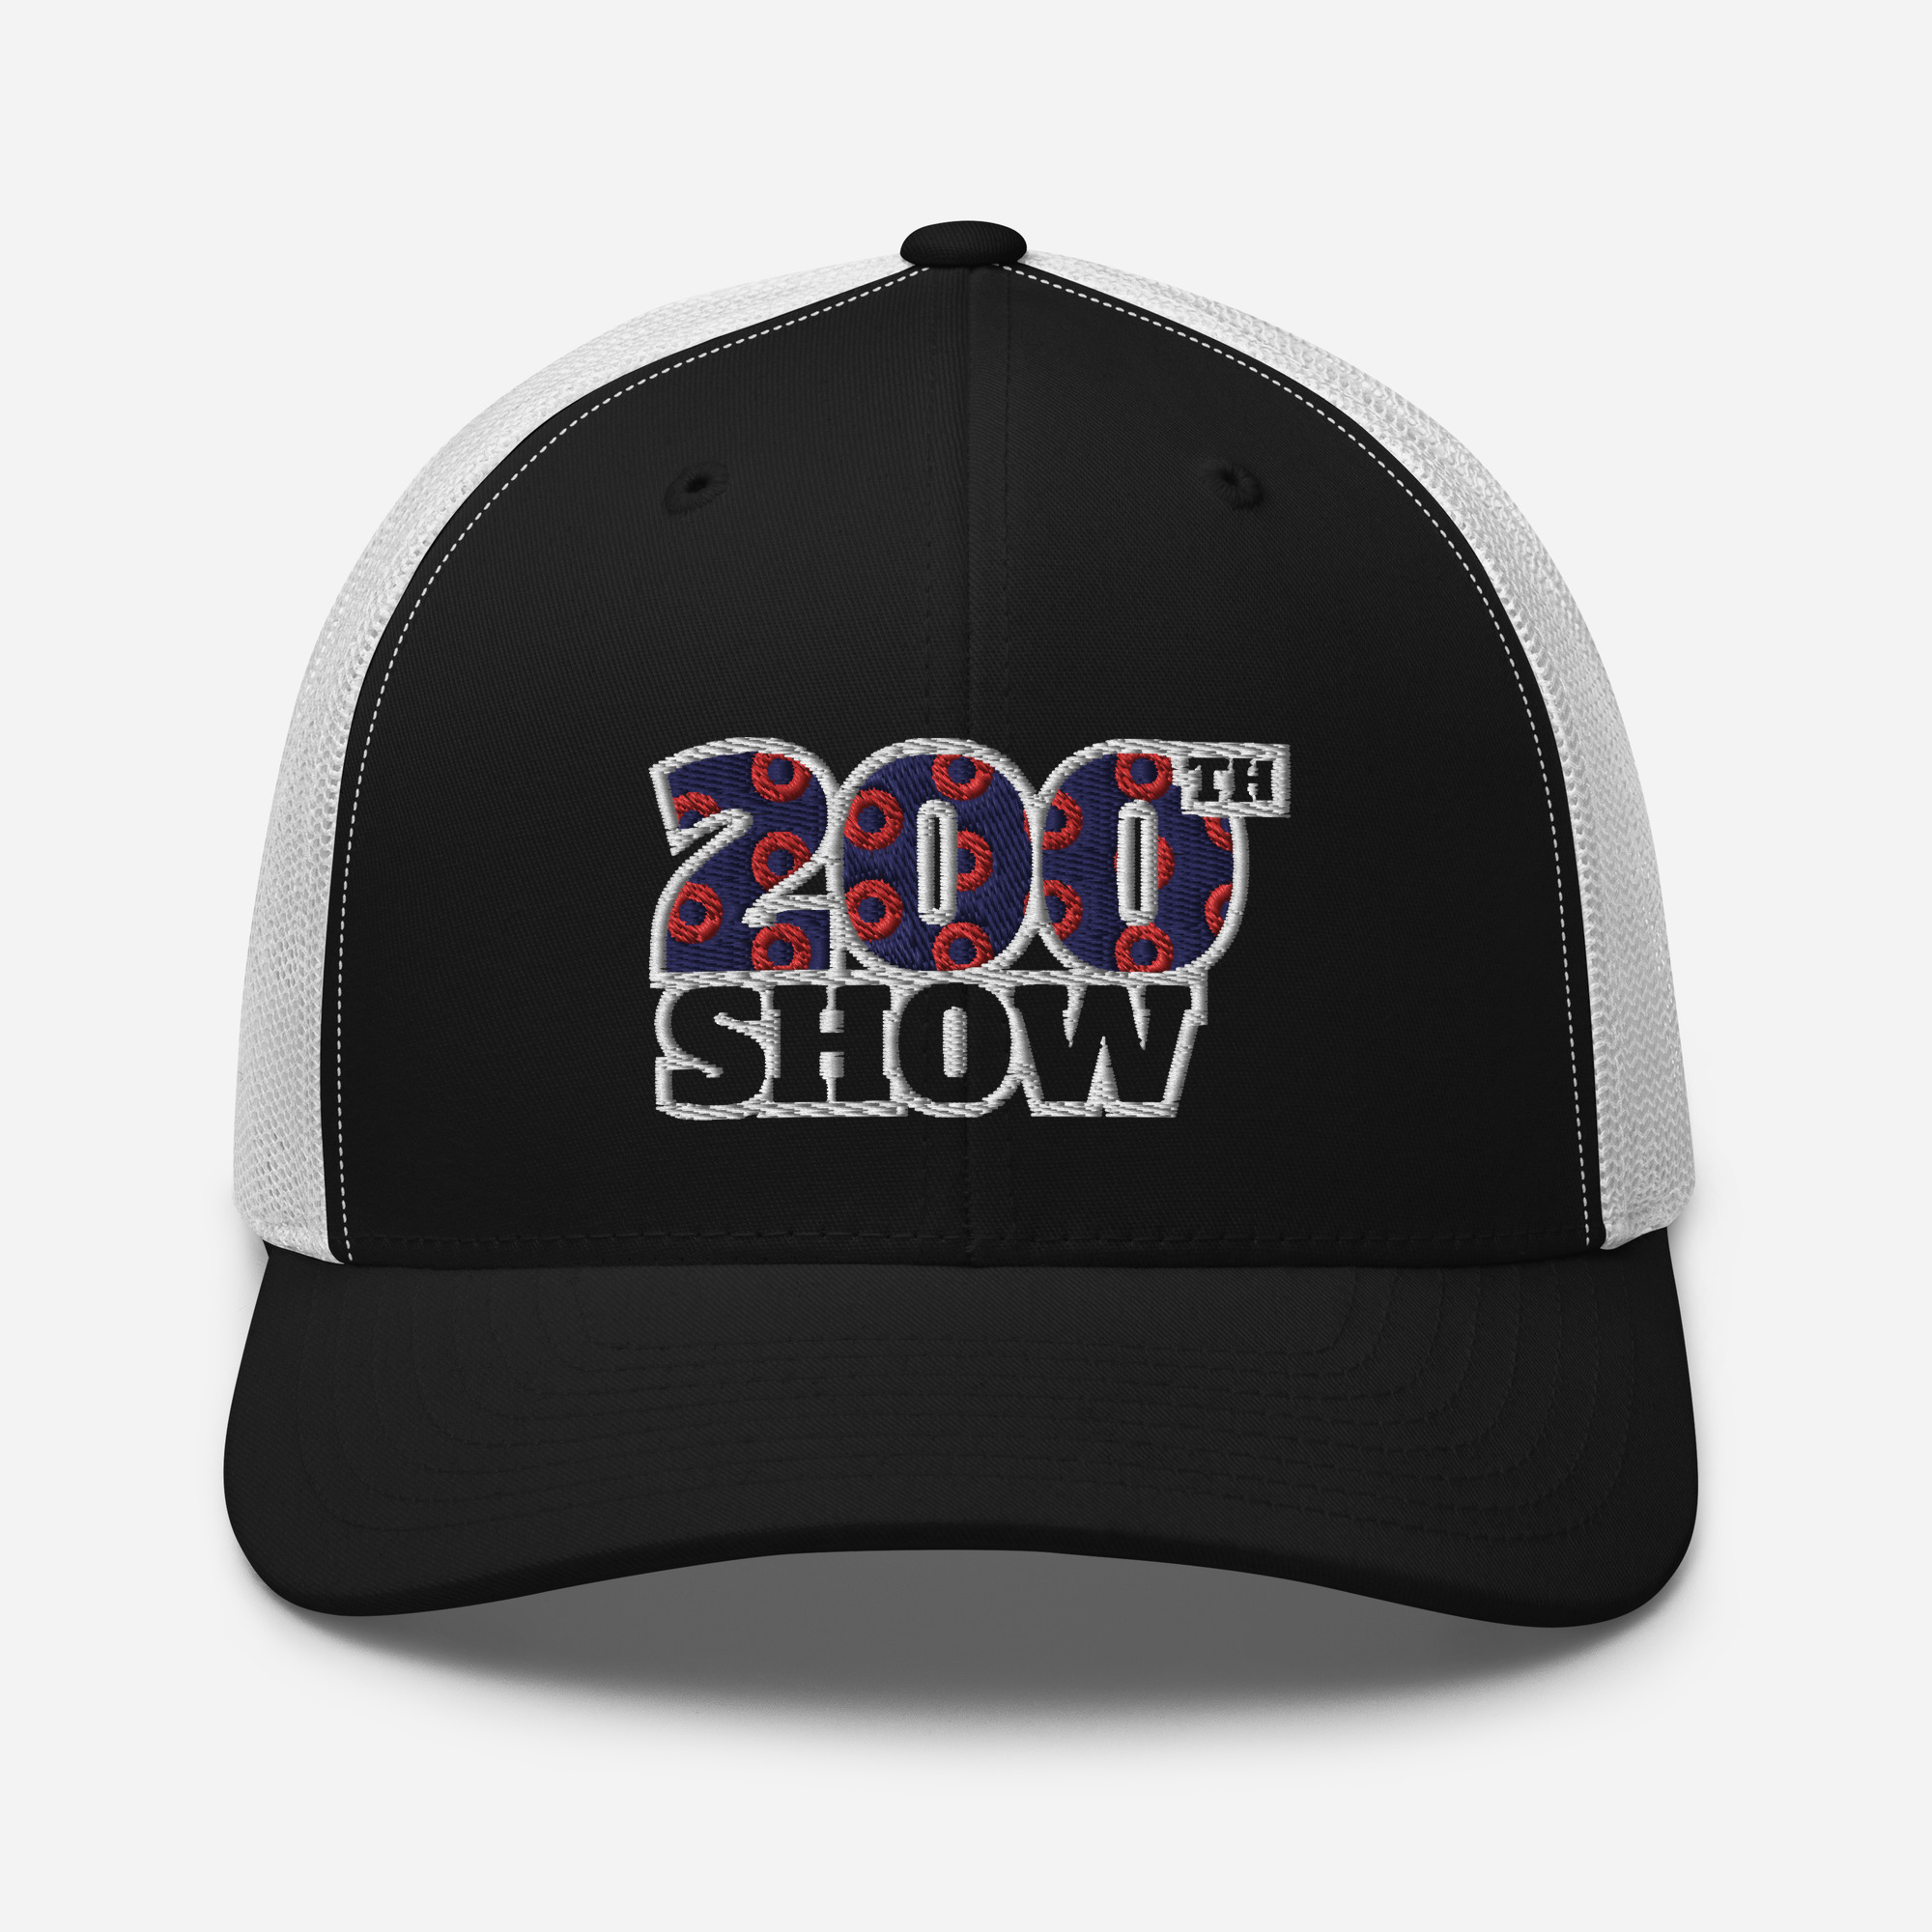 Phish - 200th Show Snapback Embroidered Ball Cap